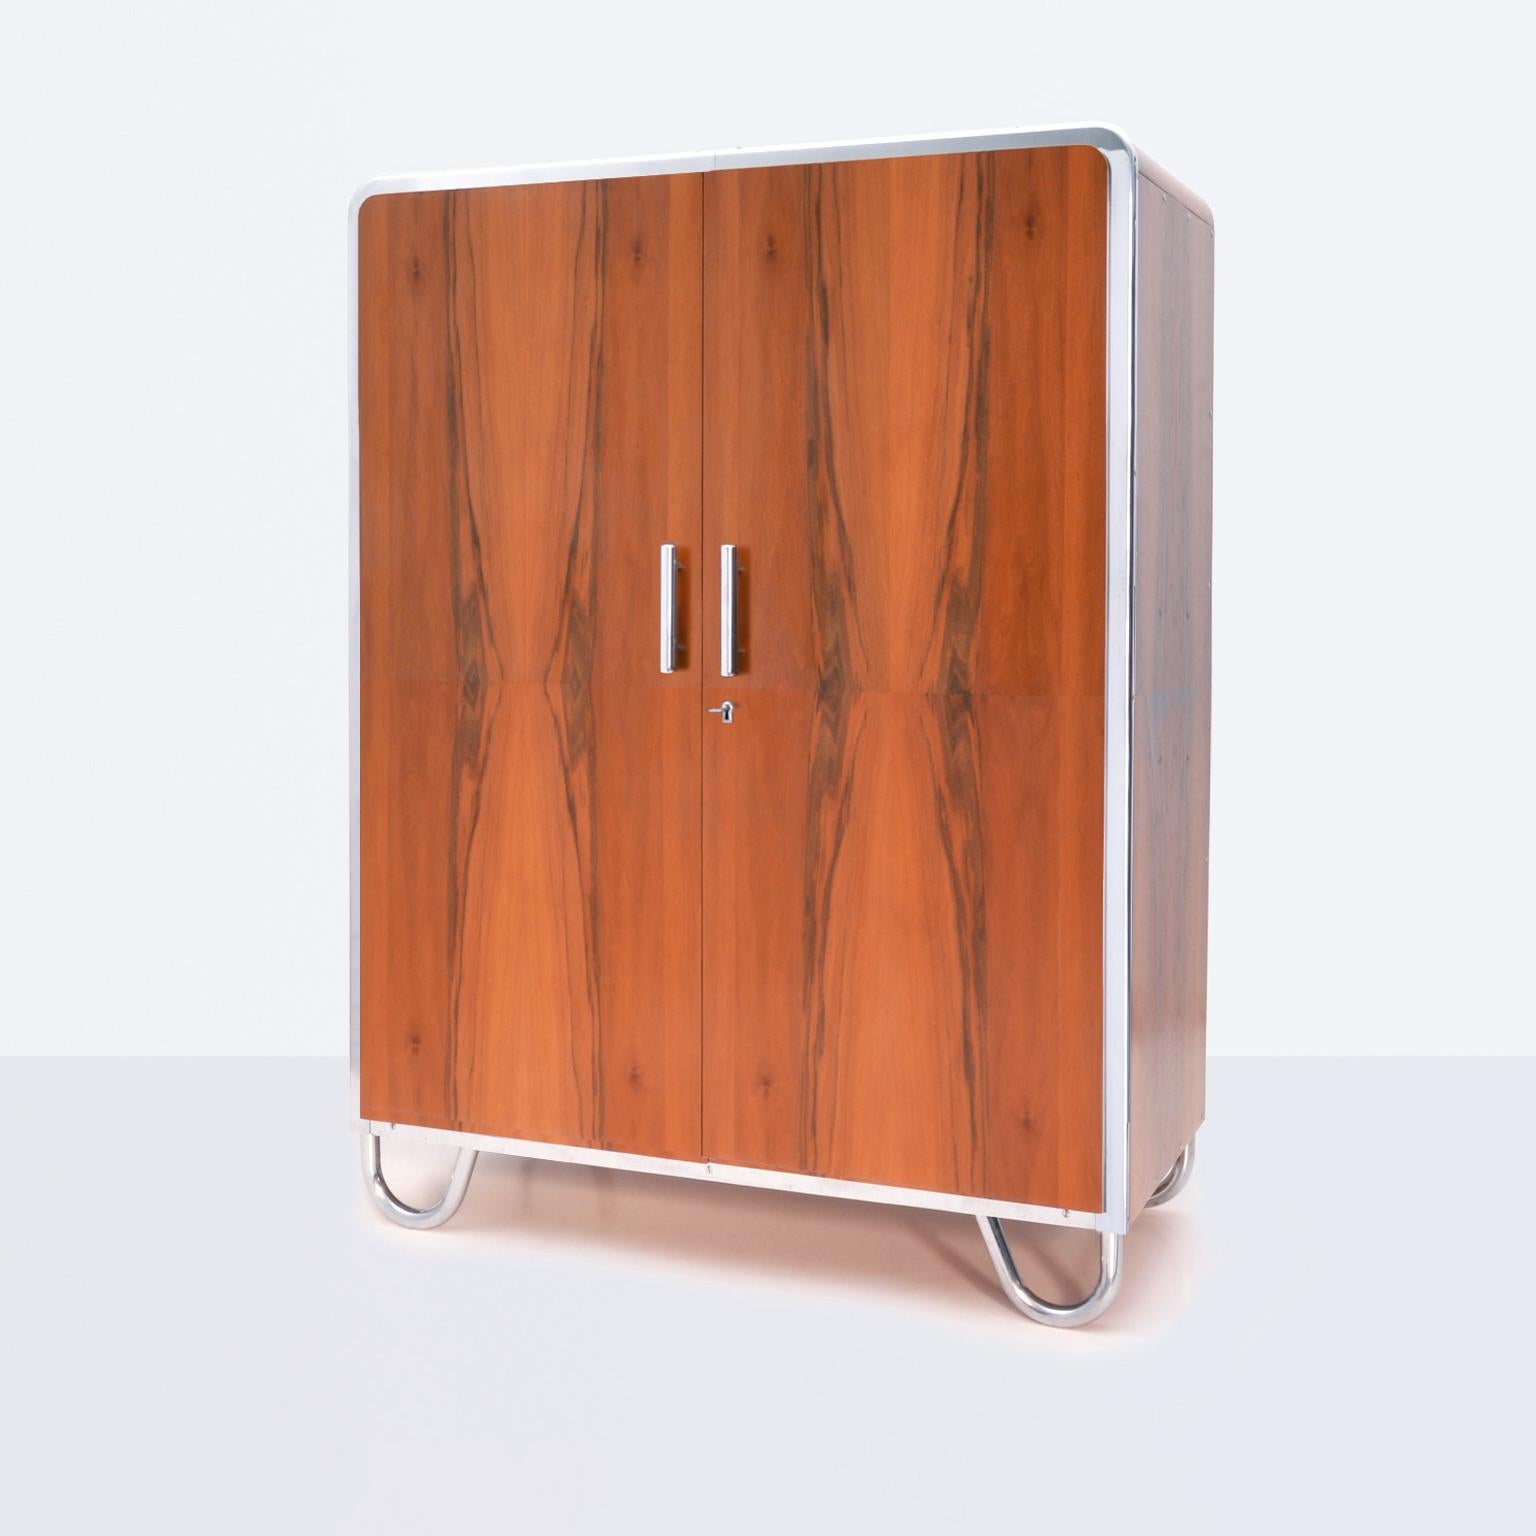 Modernist Cabinet made of chrome plated metal and walnut veneer. Designed and manufactured by Robert Slezak, c. 1930.

Restored on request. Delivery time c. 12-15 weeks.